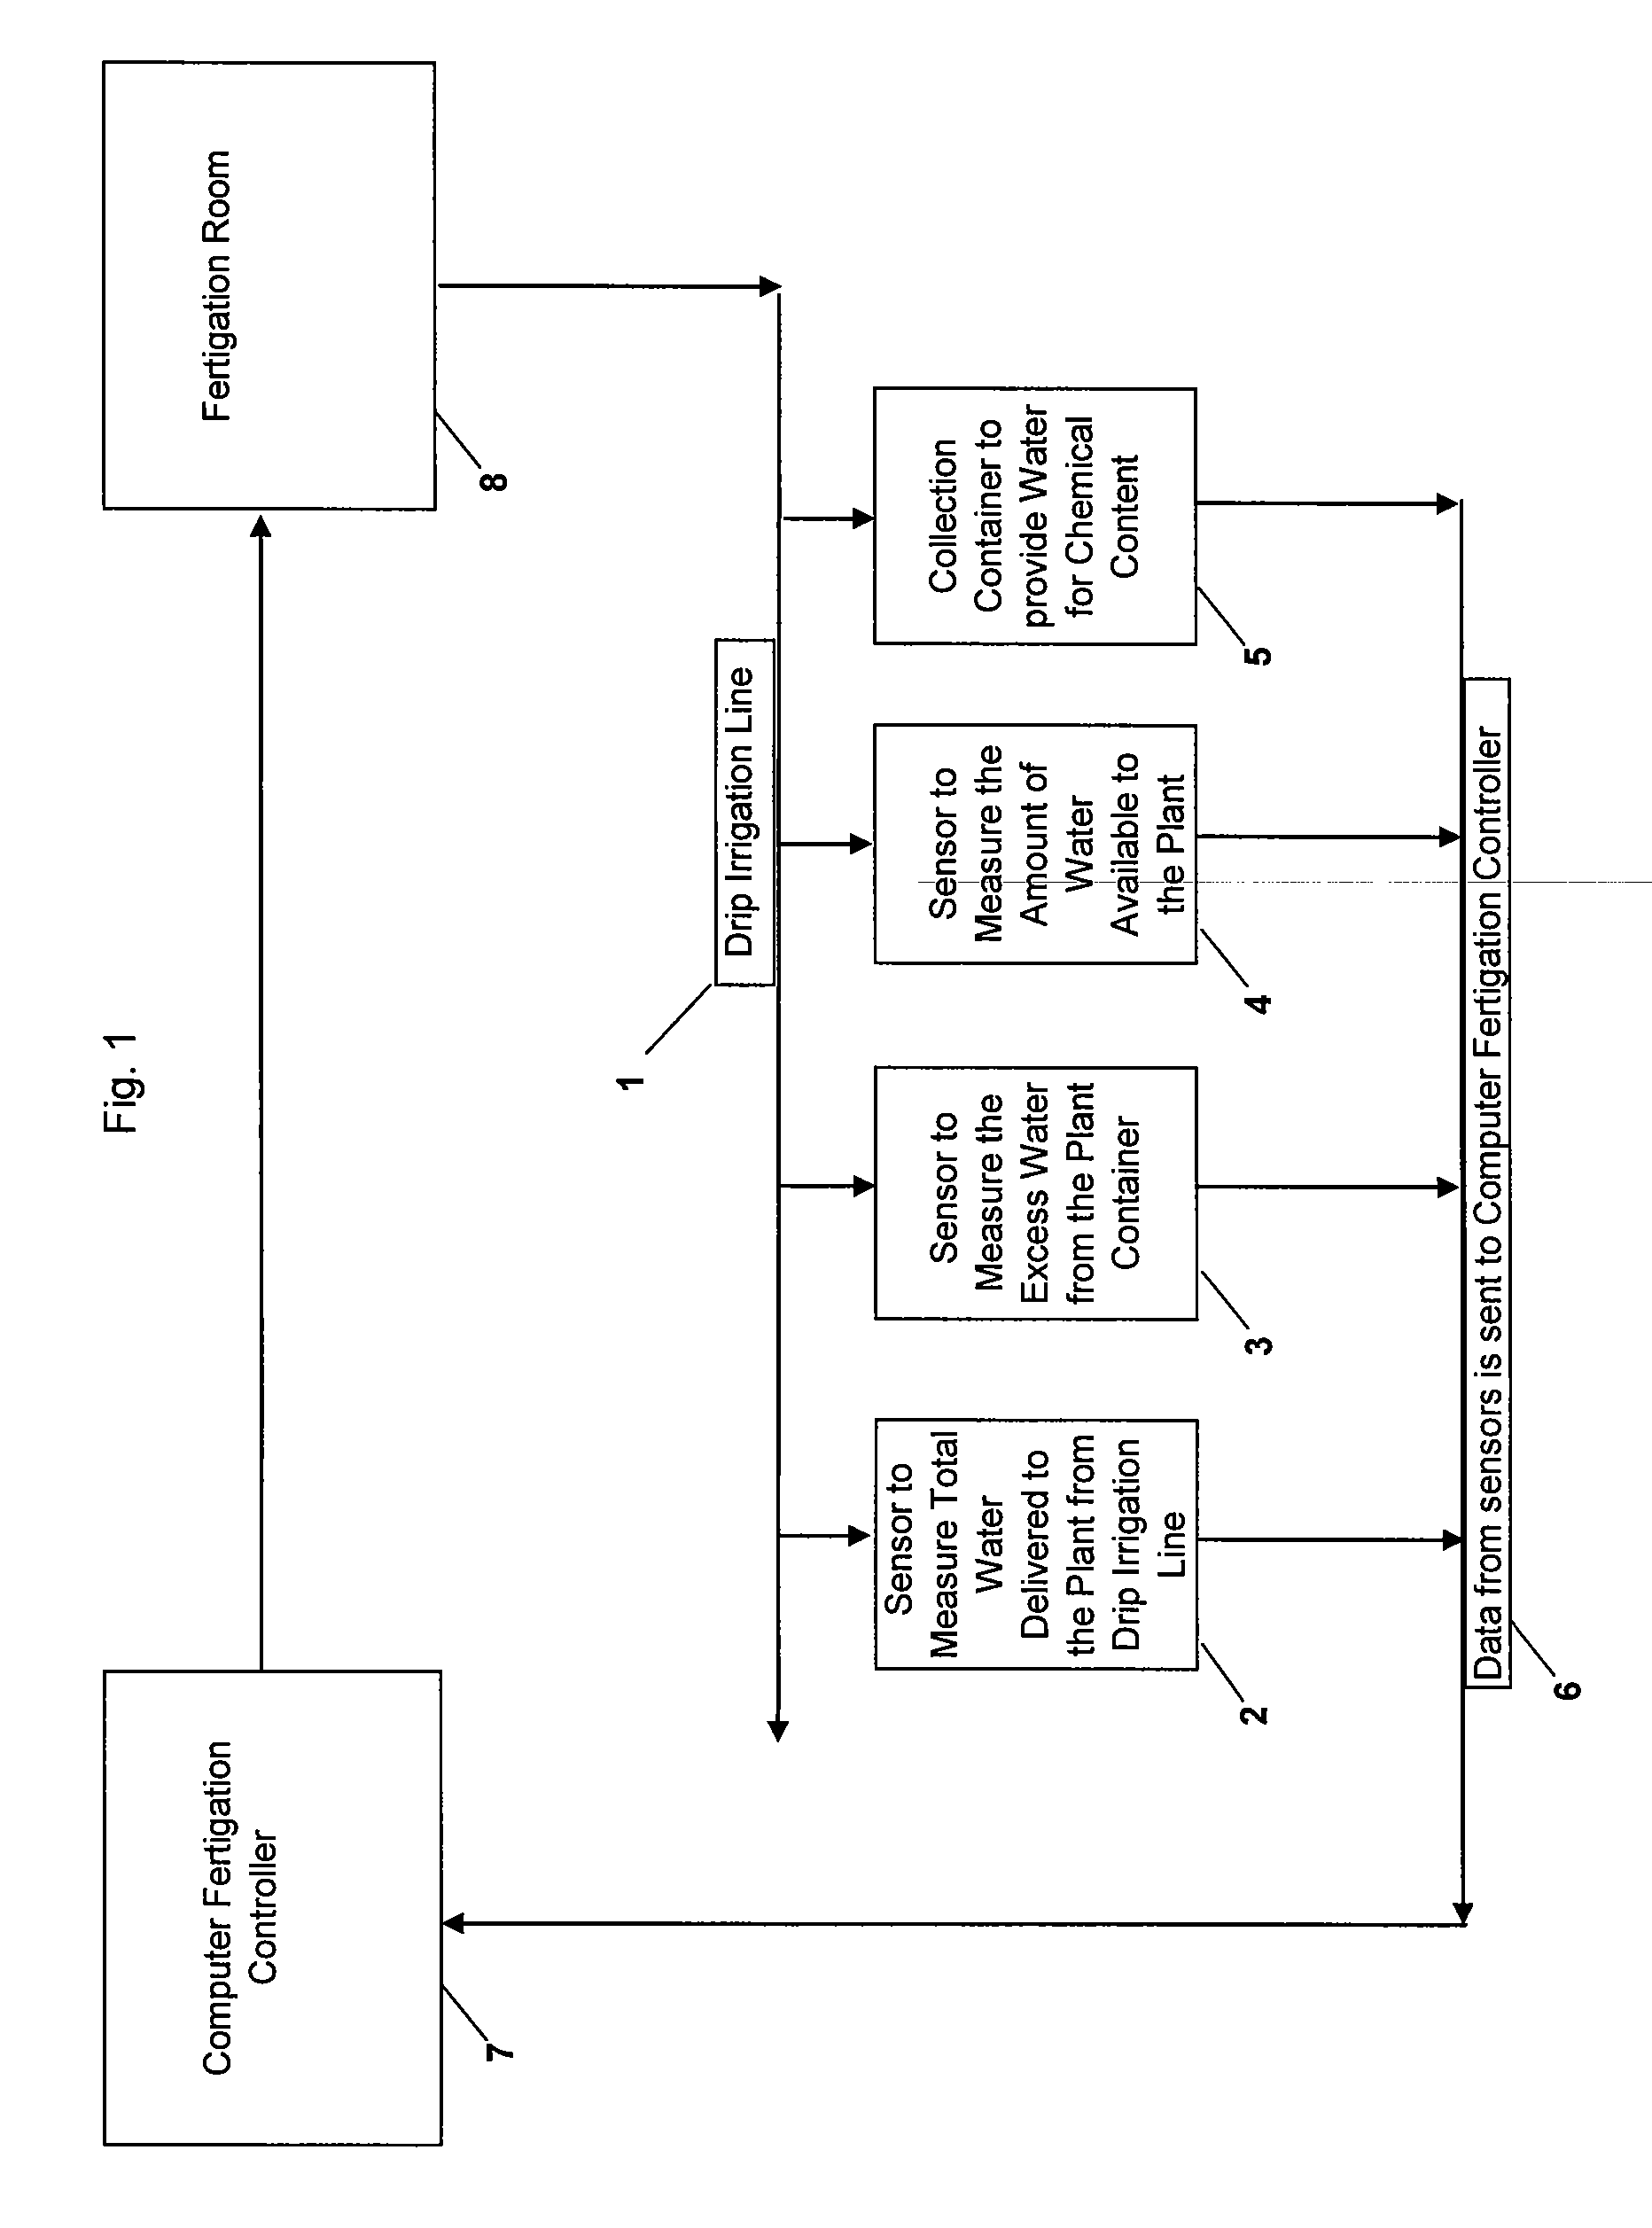 Computer Controlled Fertigation System and Method